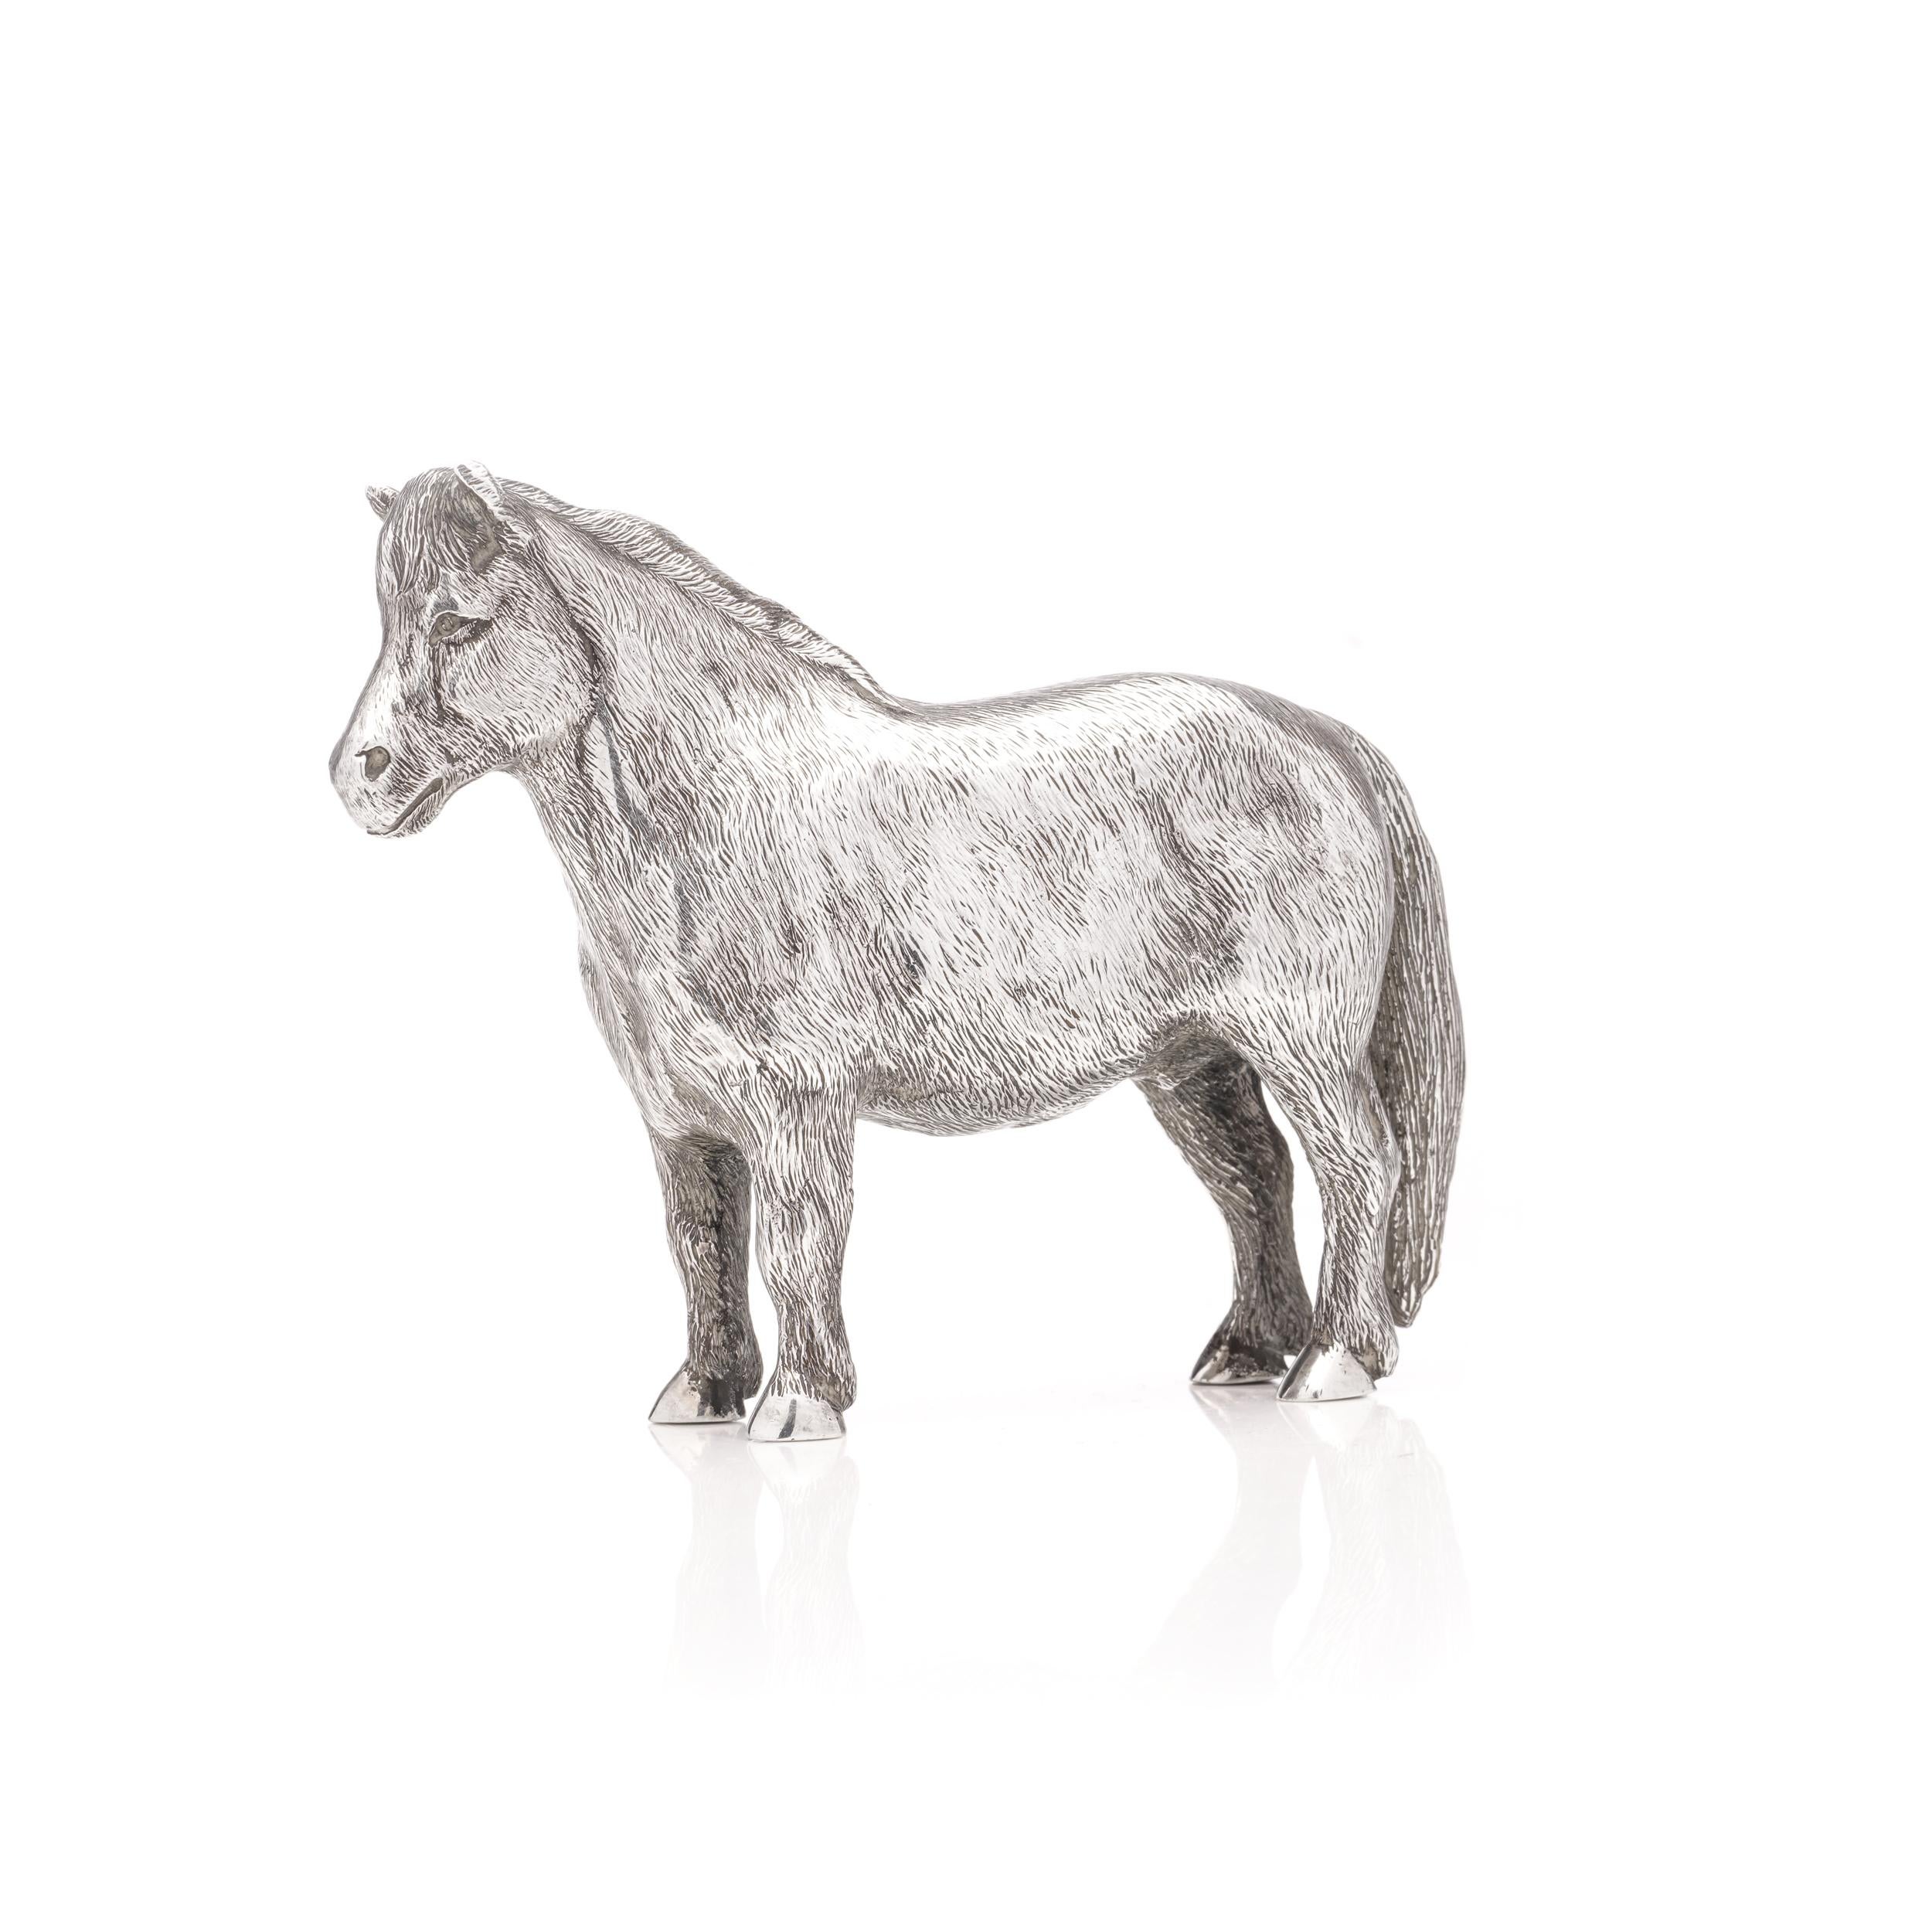 Vintage sterling silver pony figurine by Edward Barnard & Sons Ltd.
Made in England, London, 1975
Fully hallmarked.

Dimensions:
Length x width x height: 11.5 x 3 x 9 cm 
Weight: 282 grams in total 

Condition: Figurine is pre-owned, has minor signs